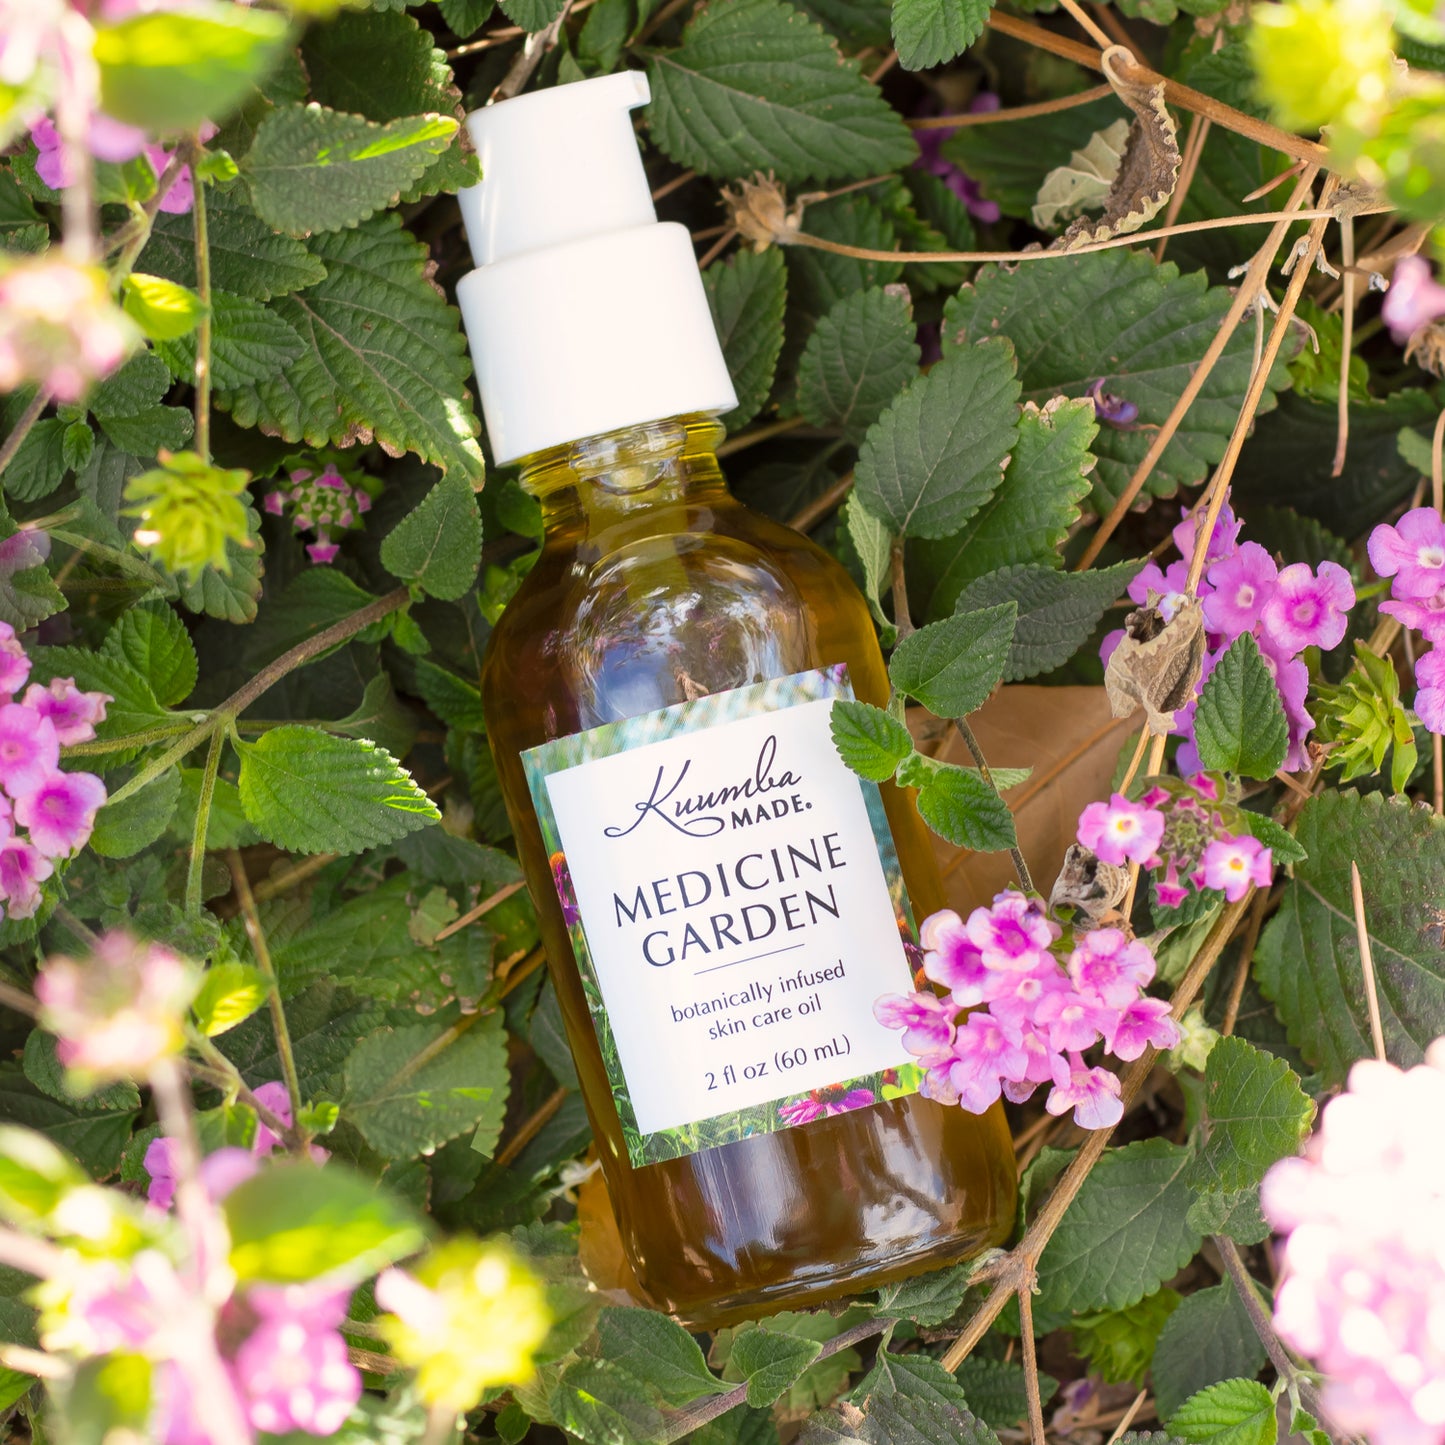 Medicine Garden Botanically Infused Skin Care Oil 2oz bottle from Kuumba Made surrounded by pink flowers.